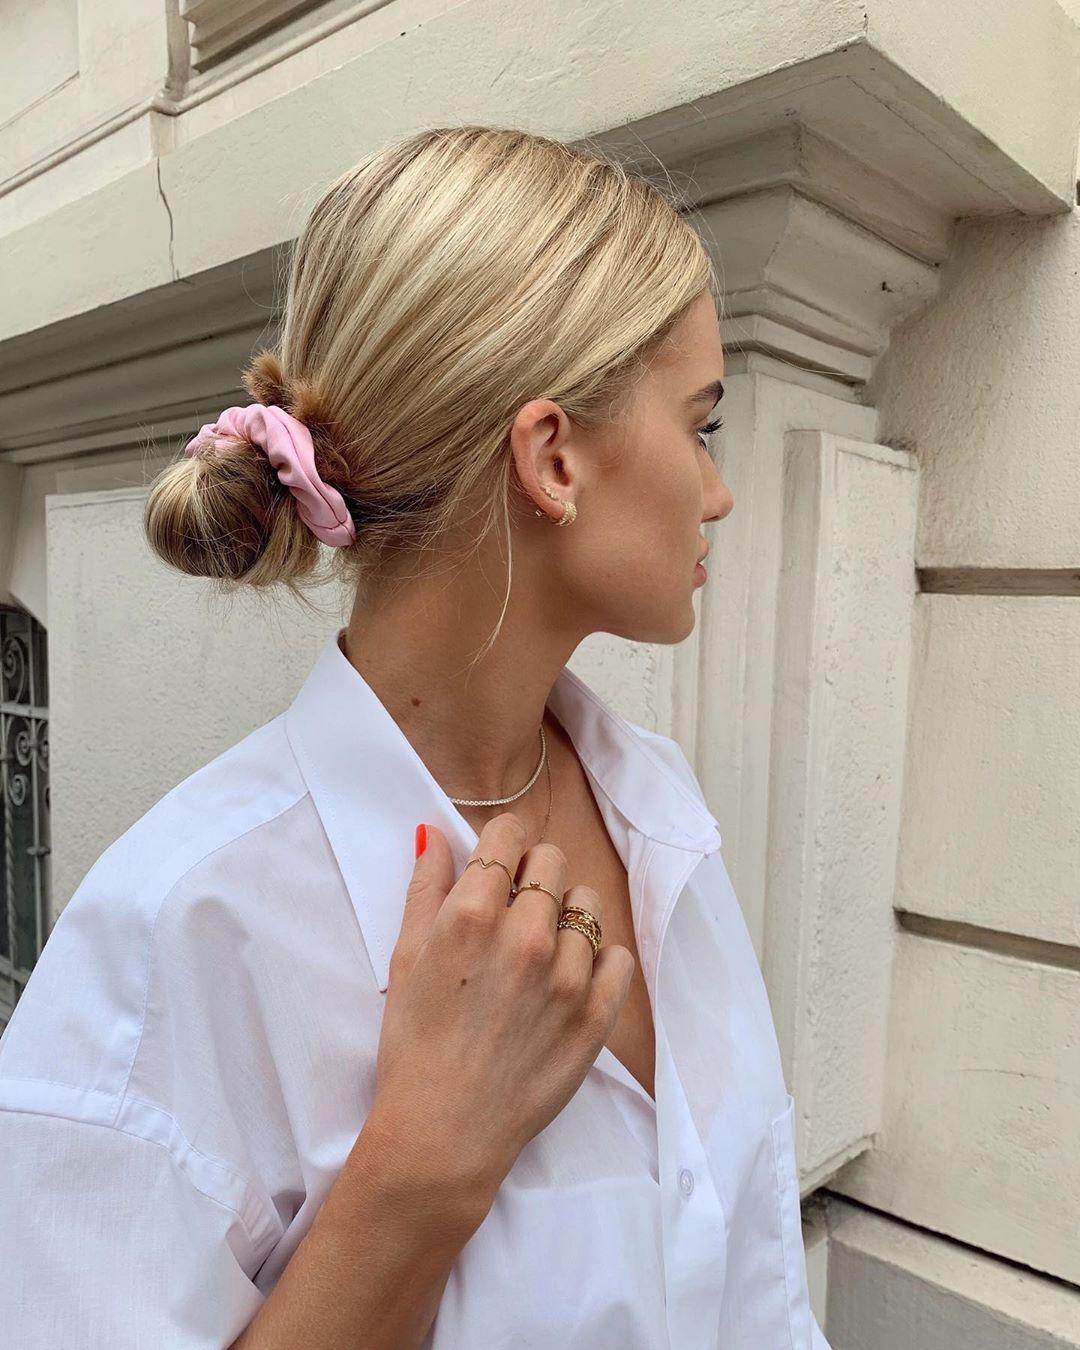 25-best-scrunchies-to-wear-now-hair-accessory-trend-2019-instagram-hairstyle-inspiration-viktoria-hutter-le-fashion-blog